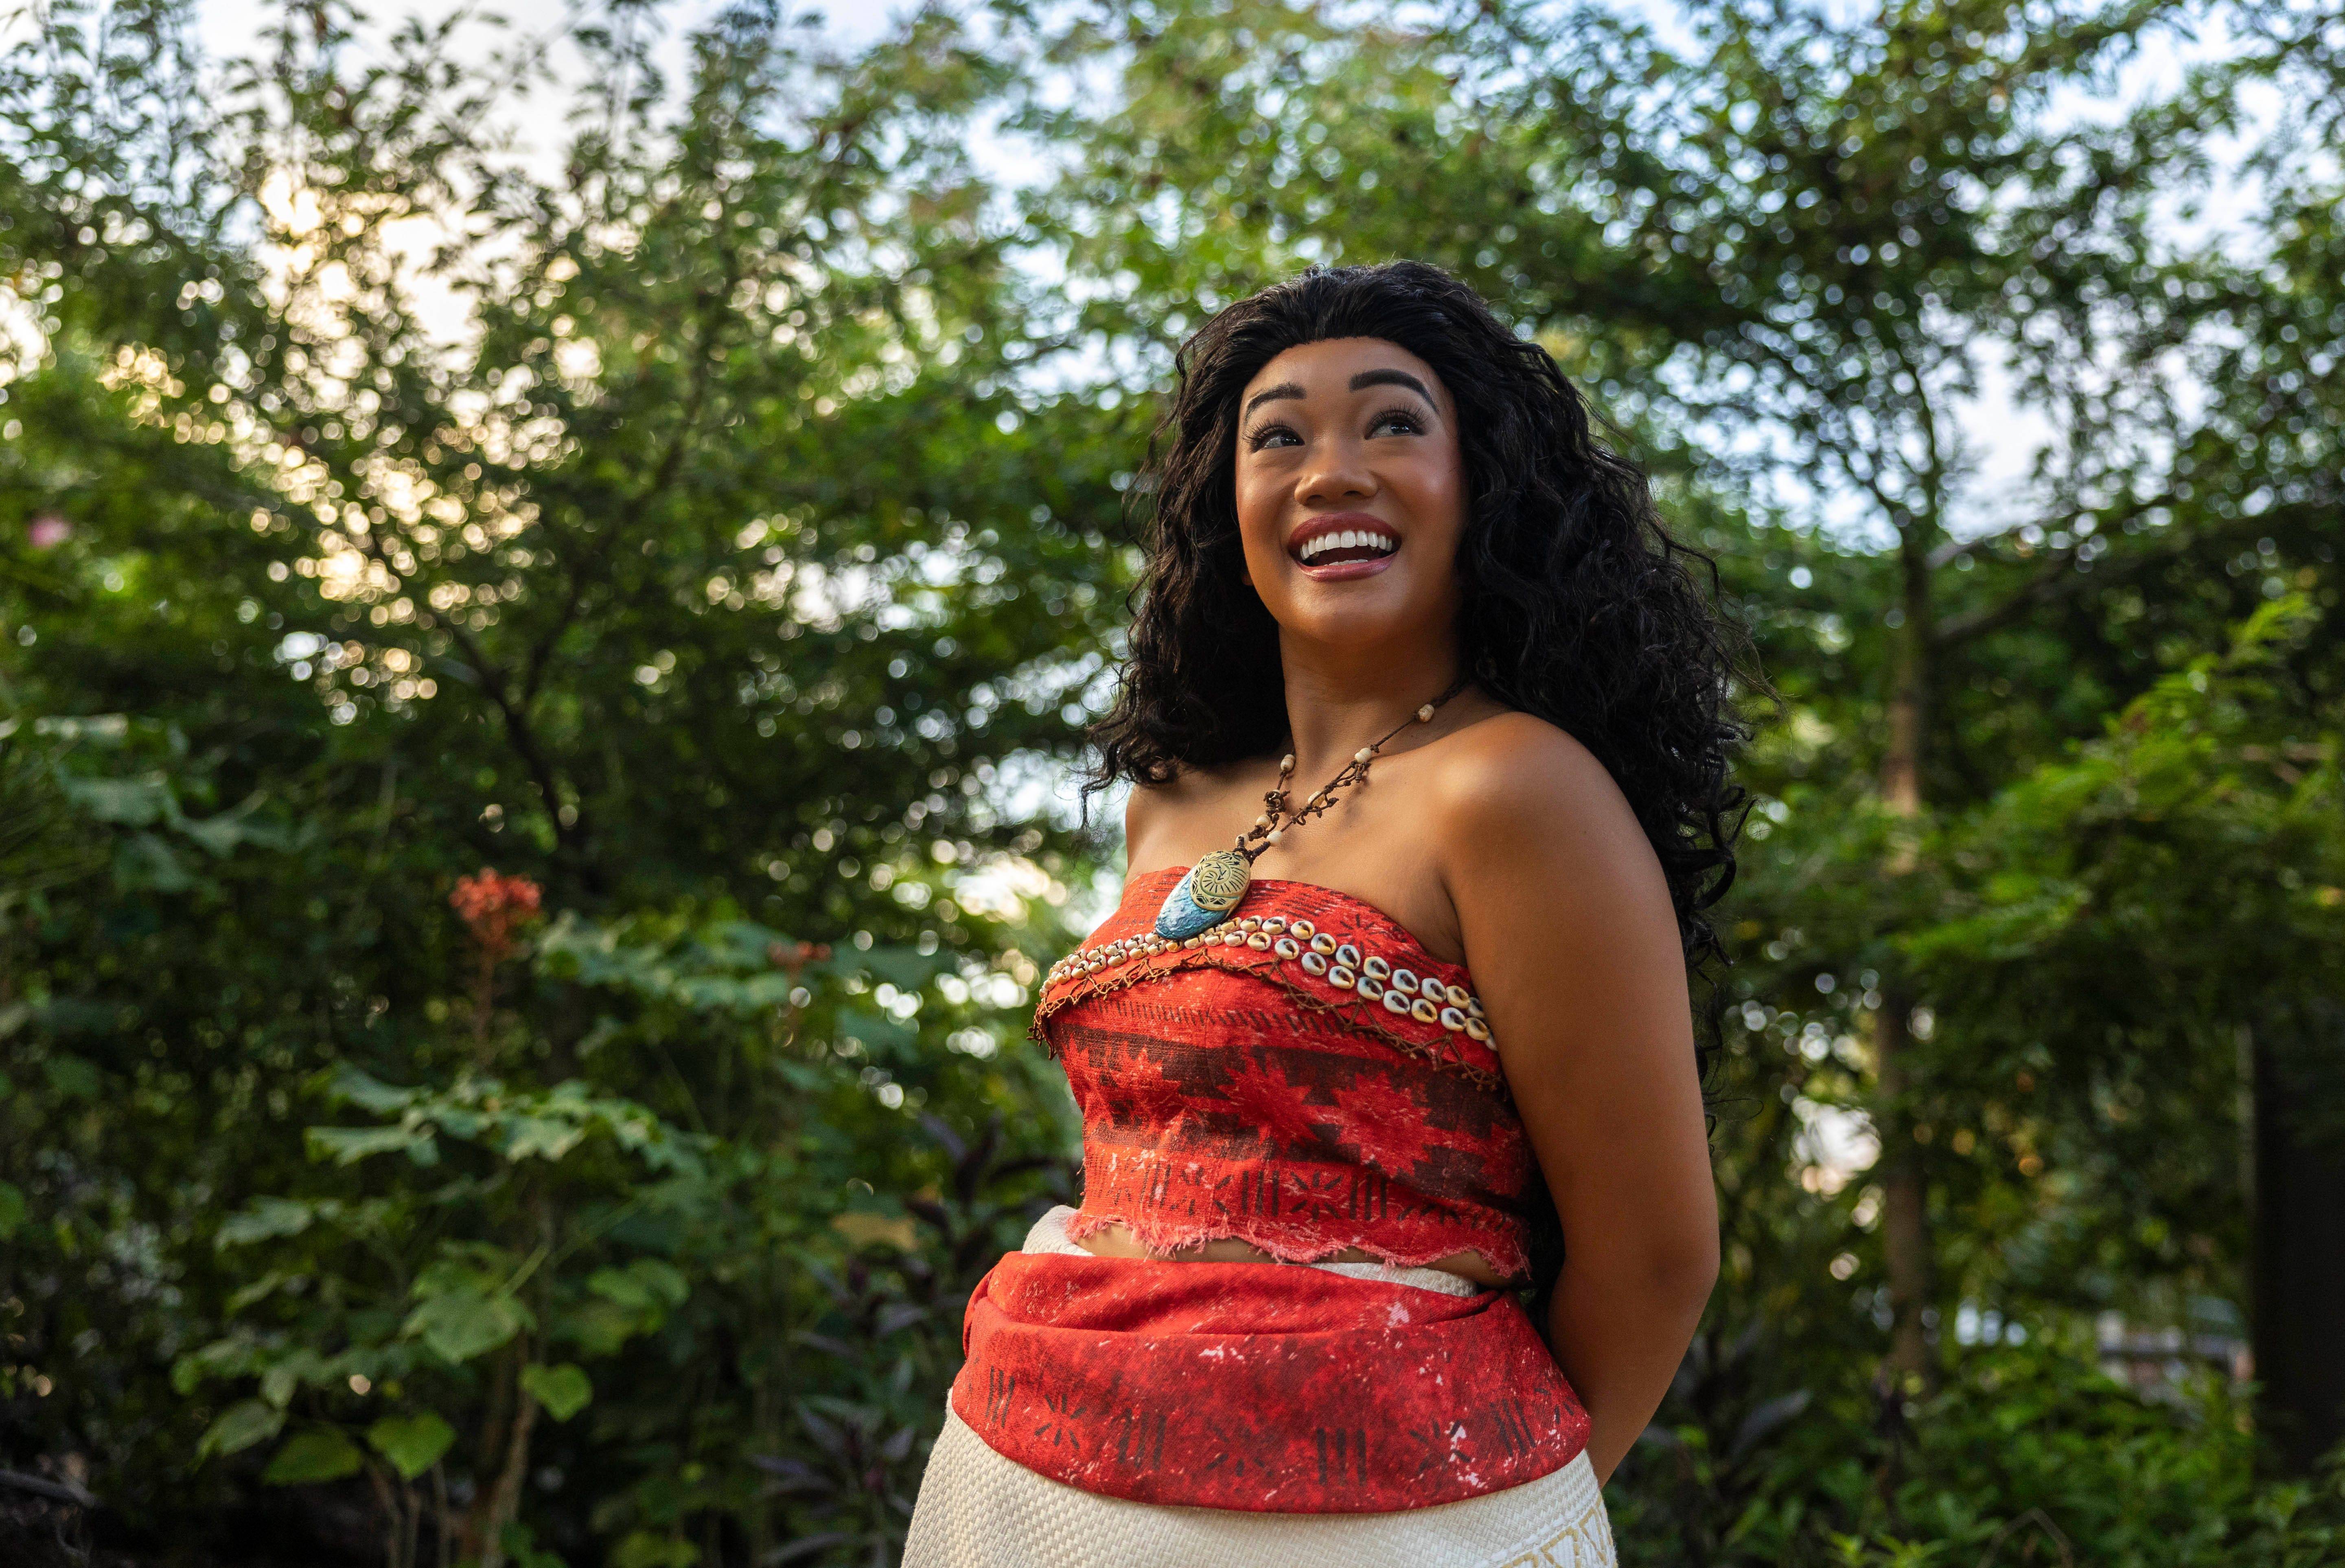 EPCOT welcomes Moana to her new meet and greet home in World Nature in October